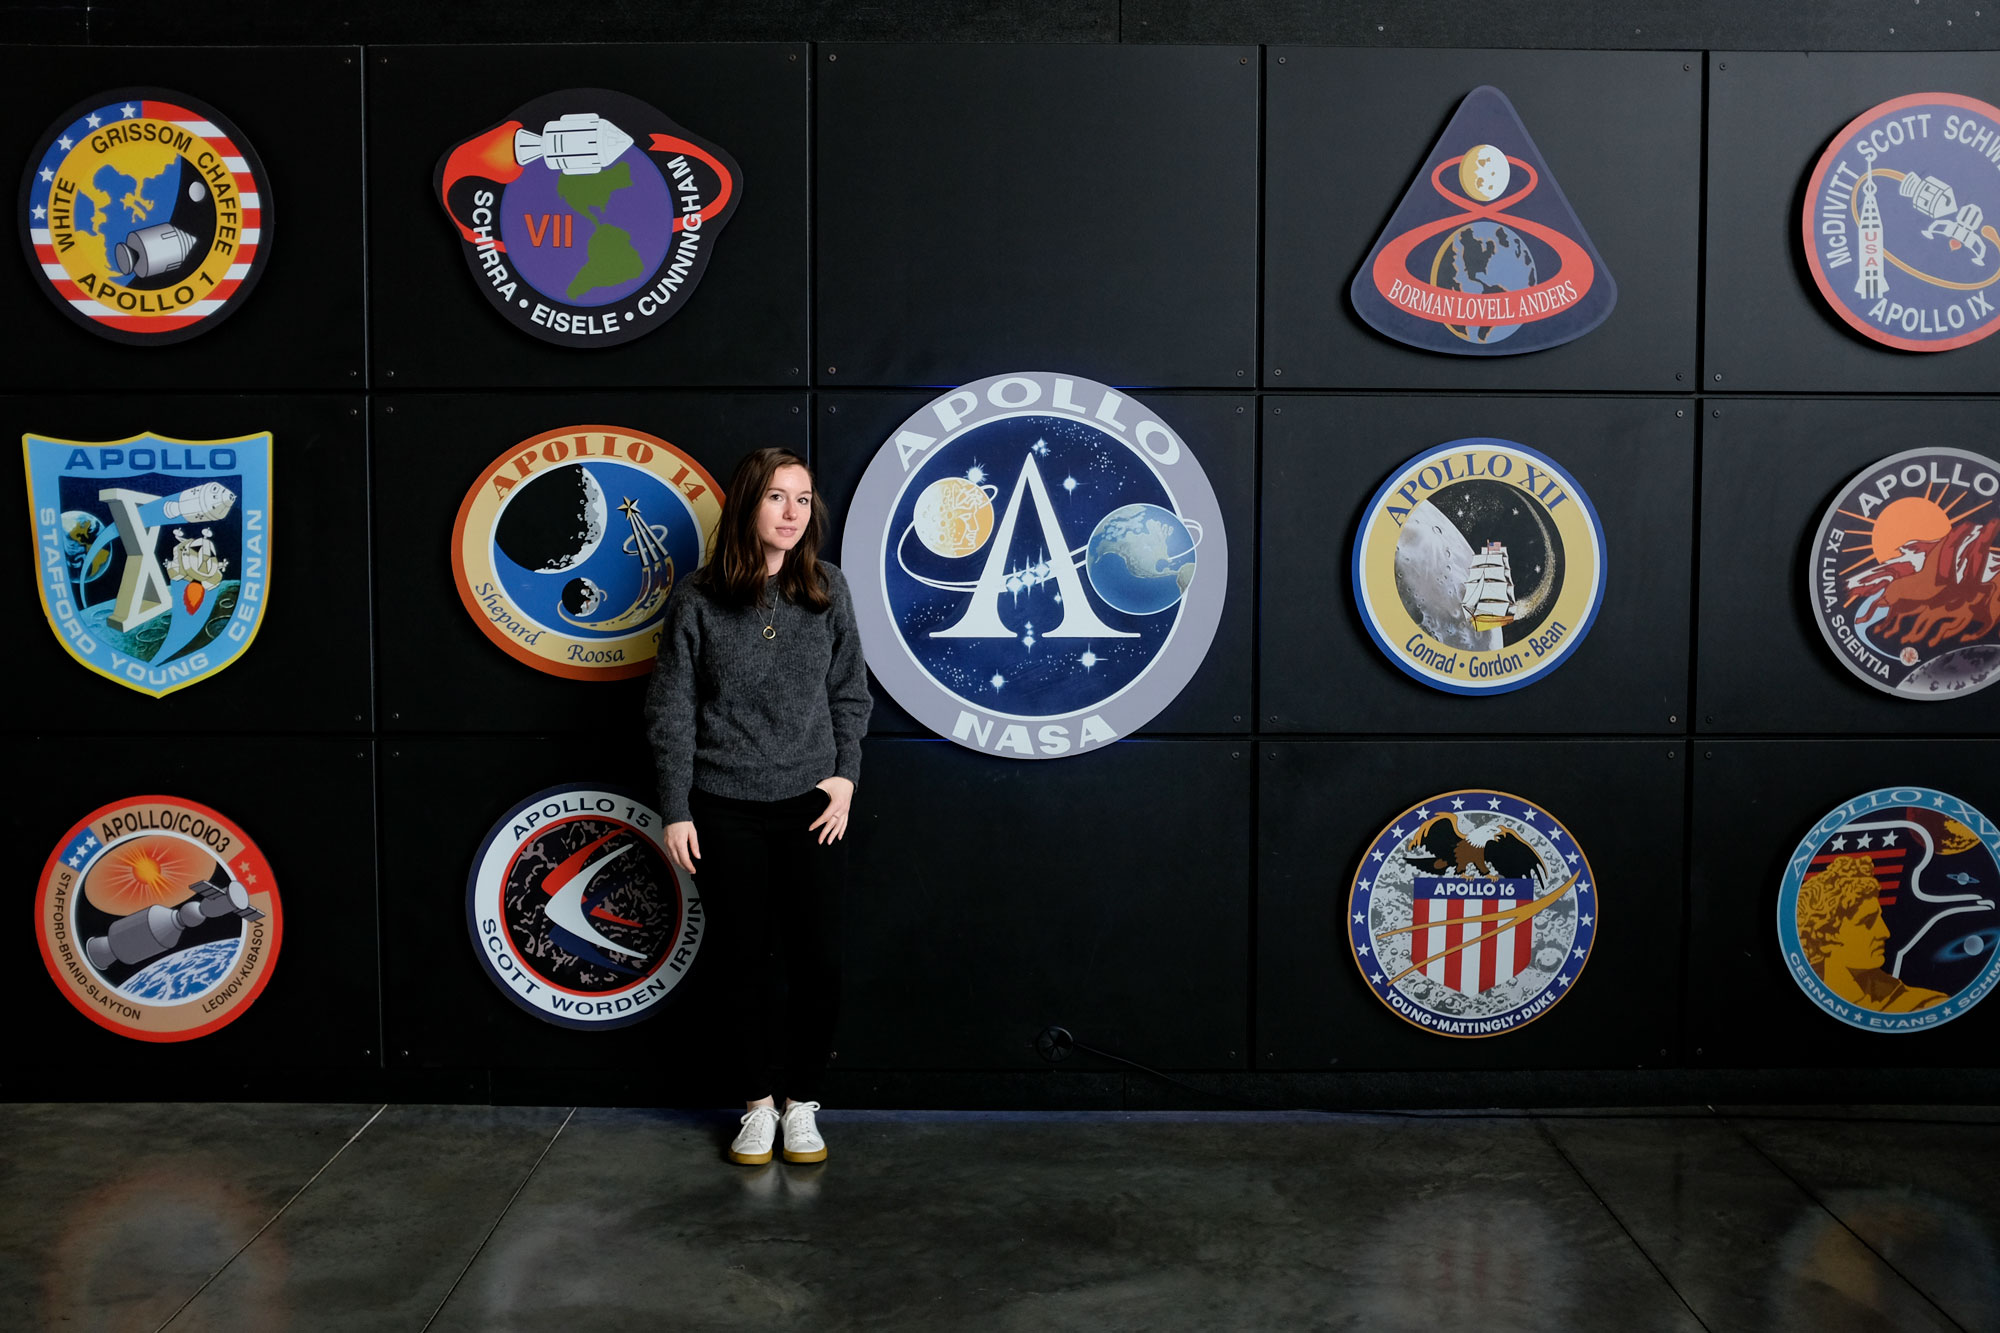 Alyssa stands in front of a wall full of NASA logos